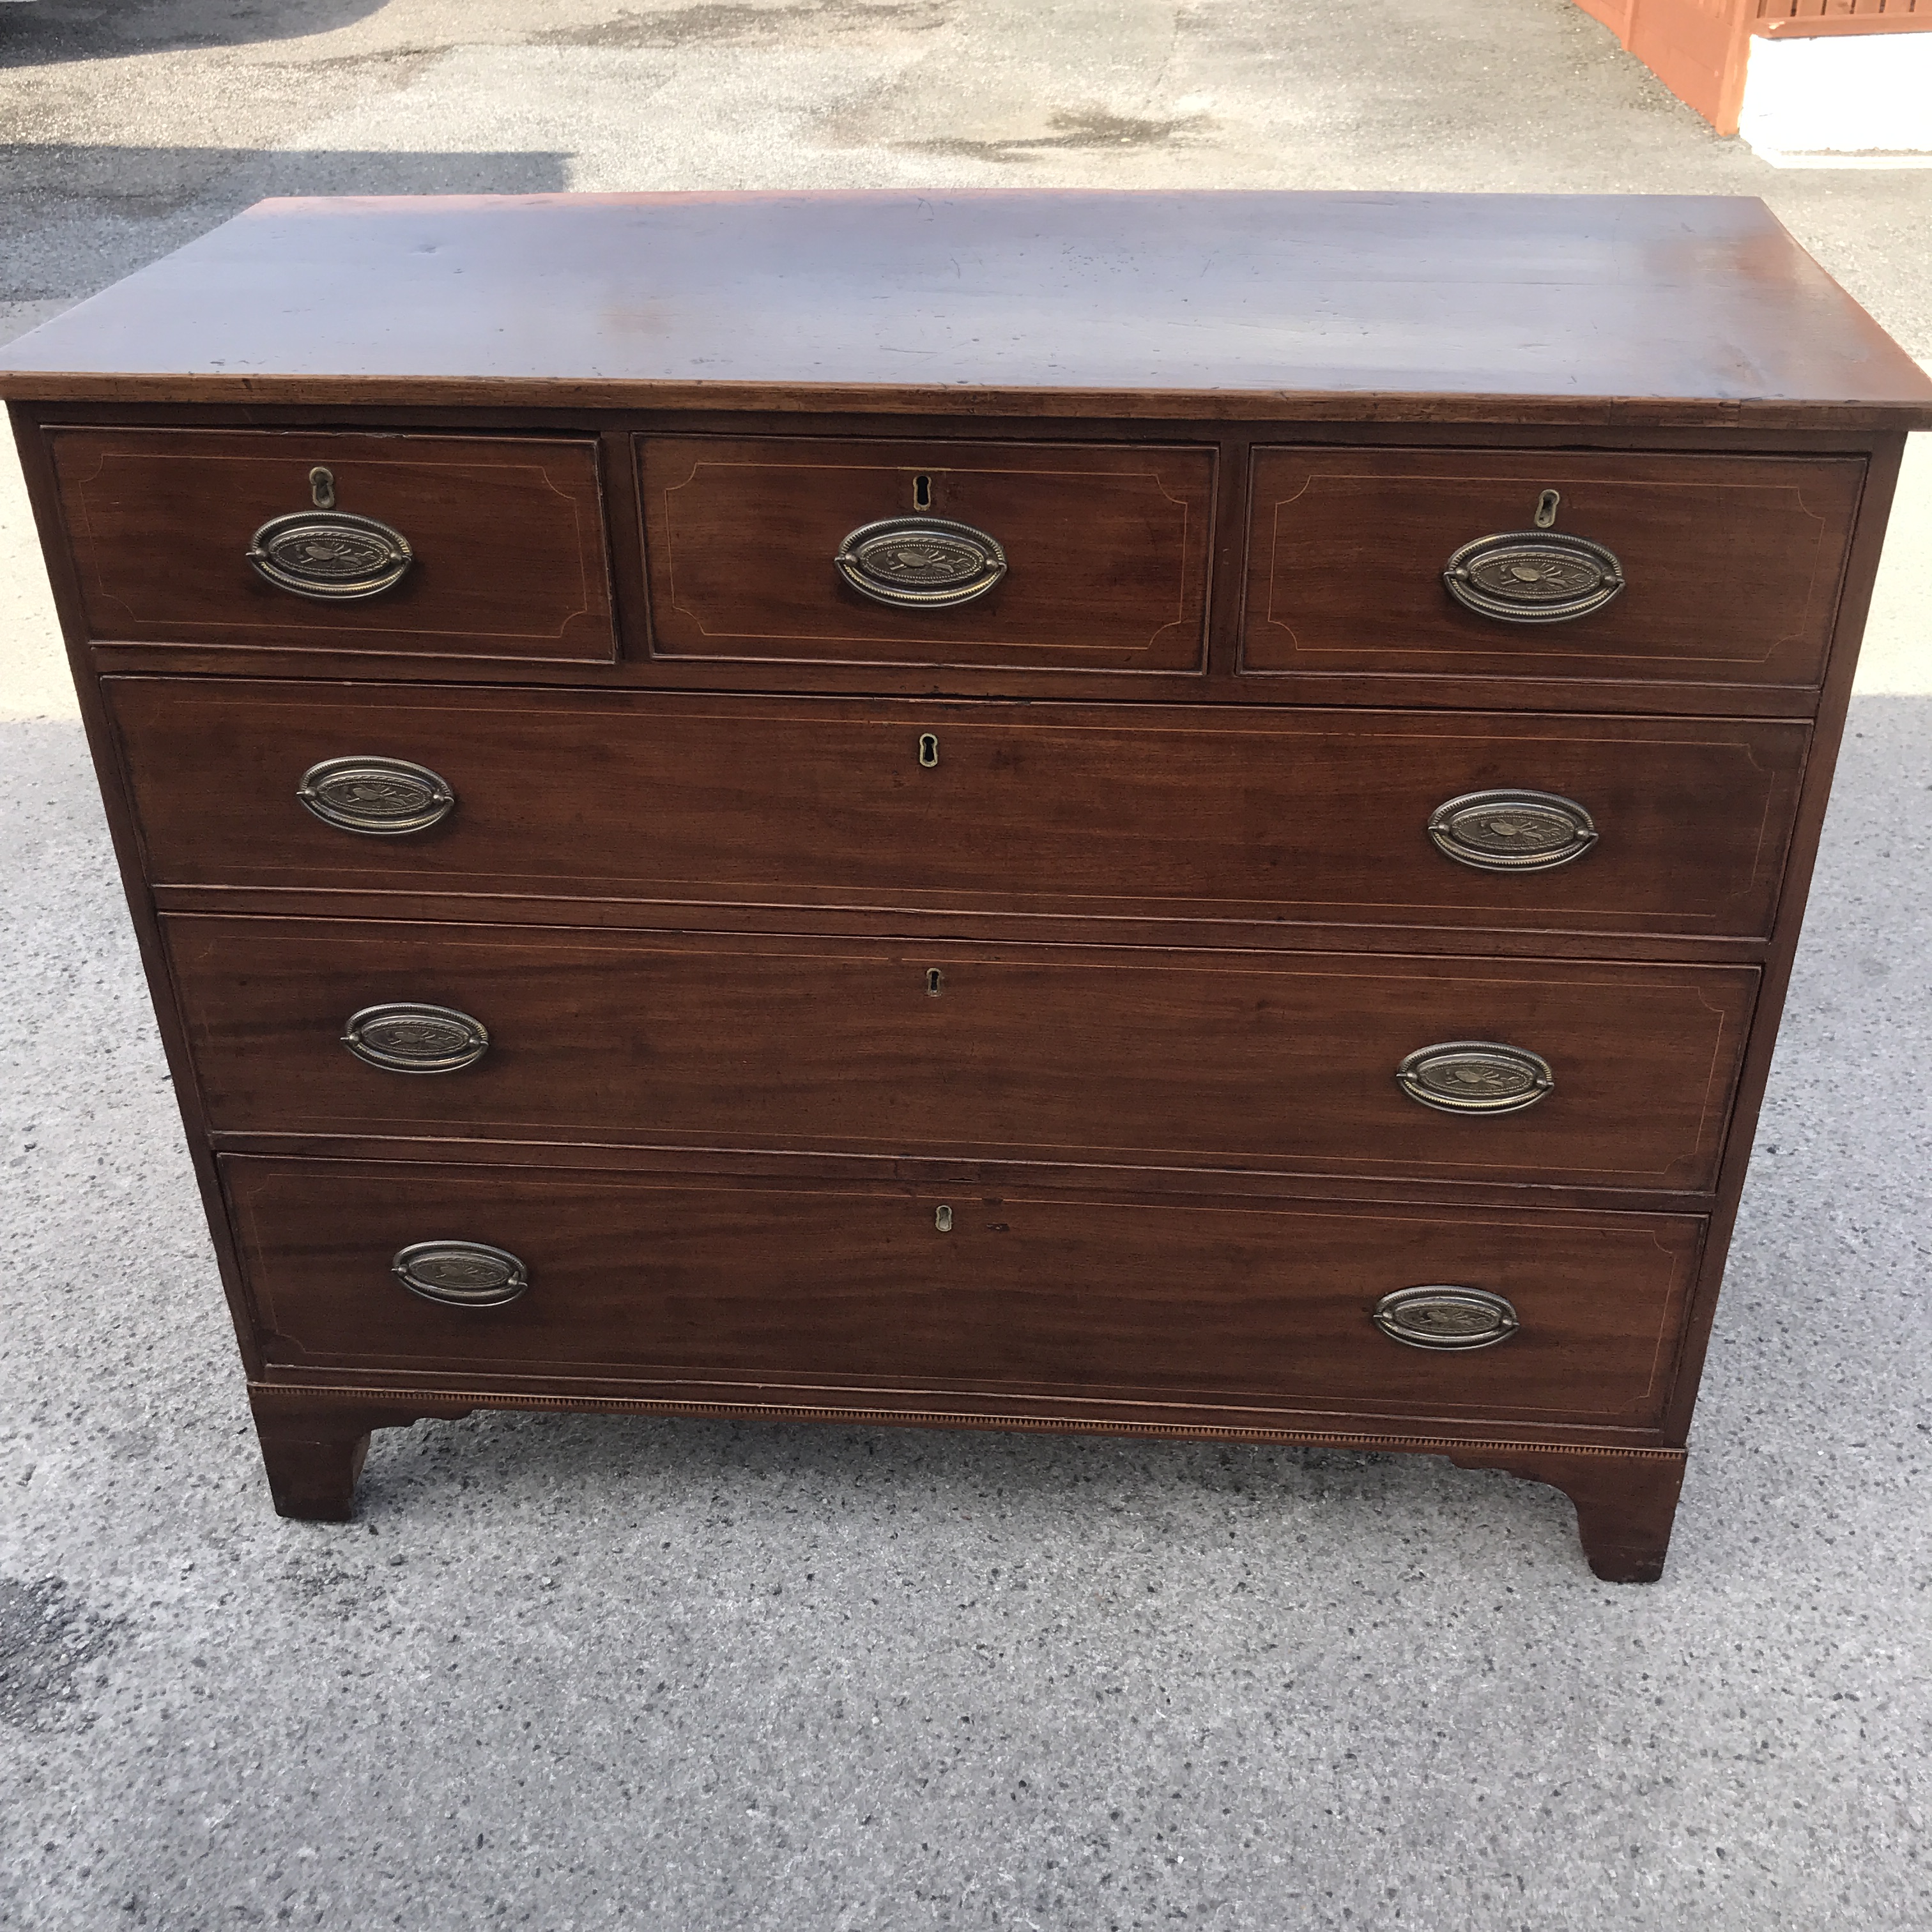 ANTIQUE REGENCY MAHOGANY CHEST OF DRAWERS